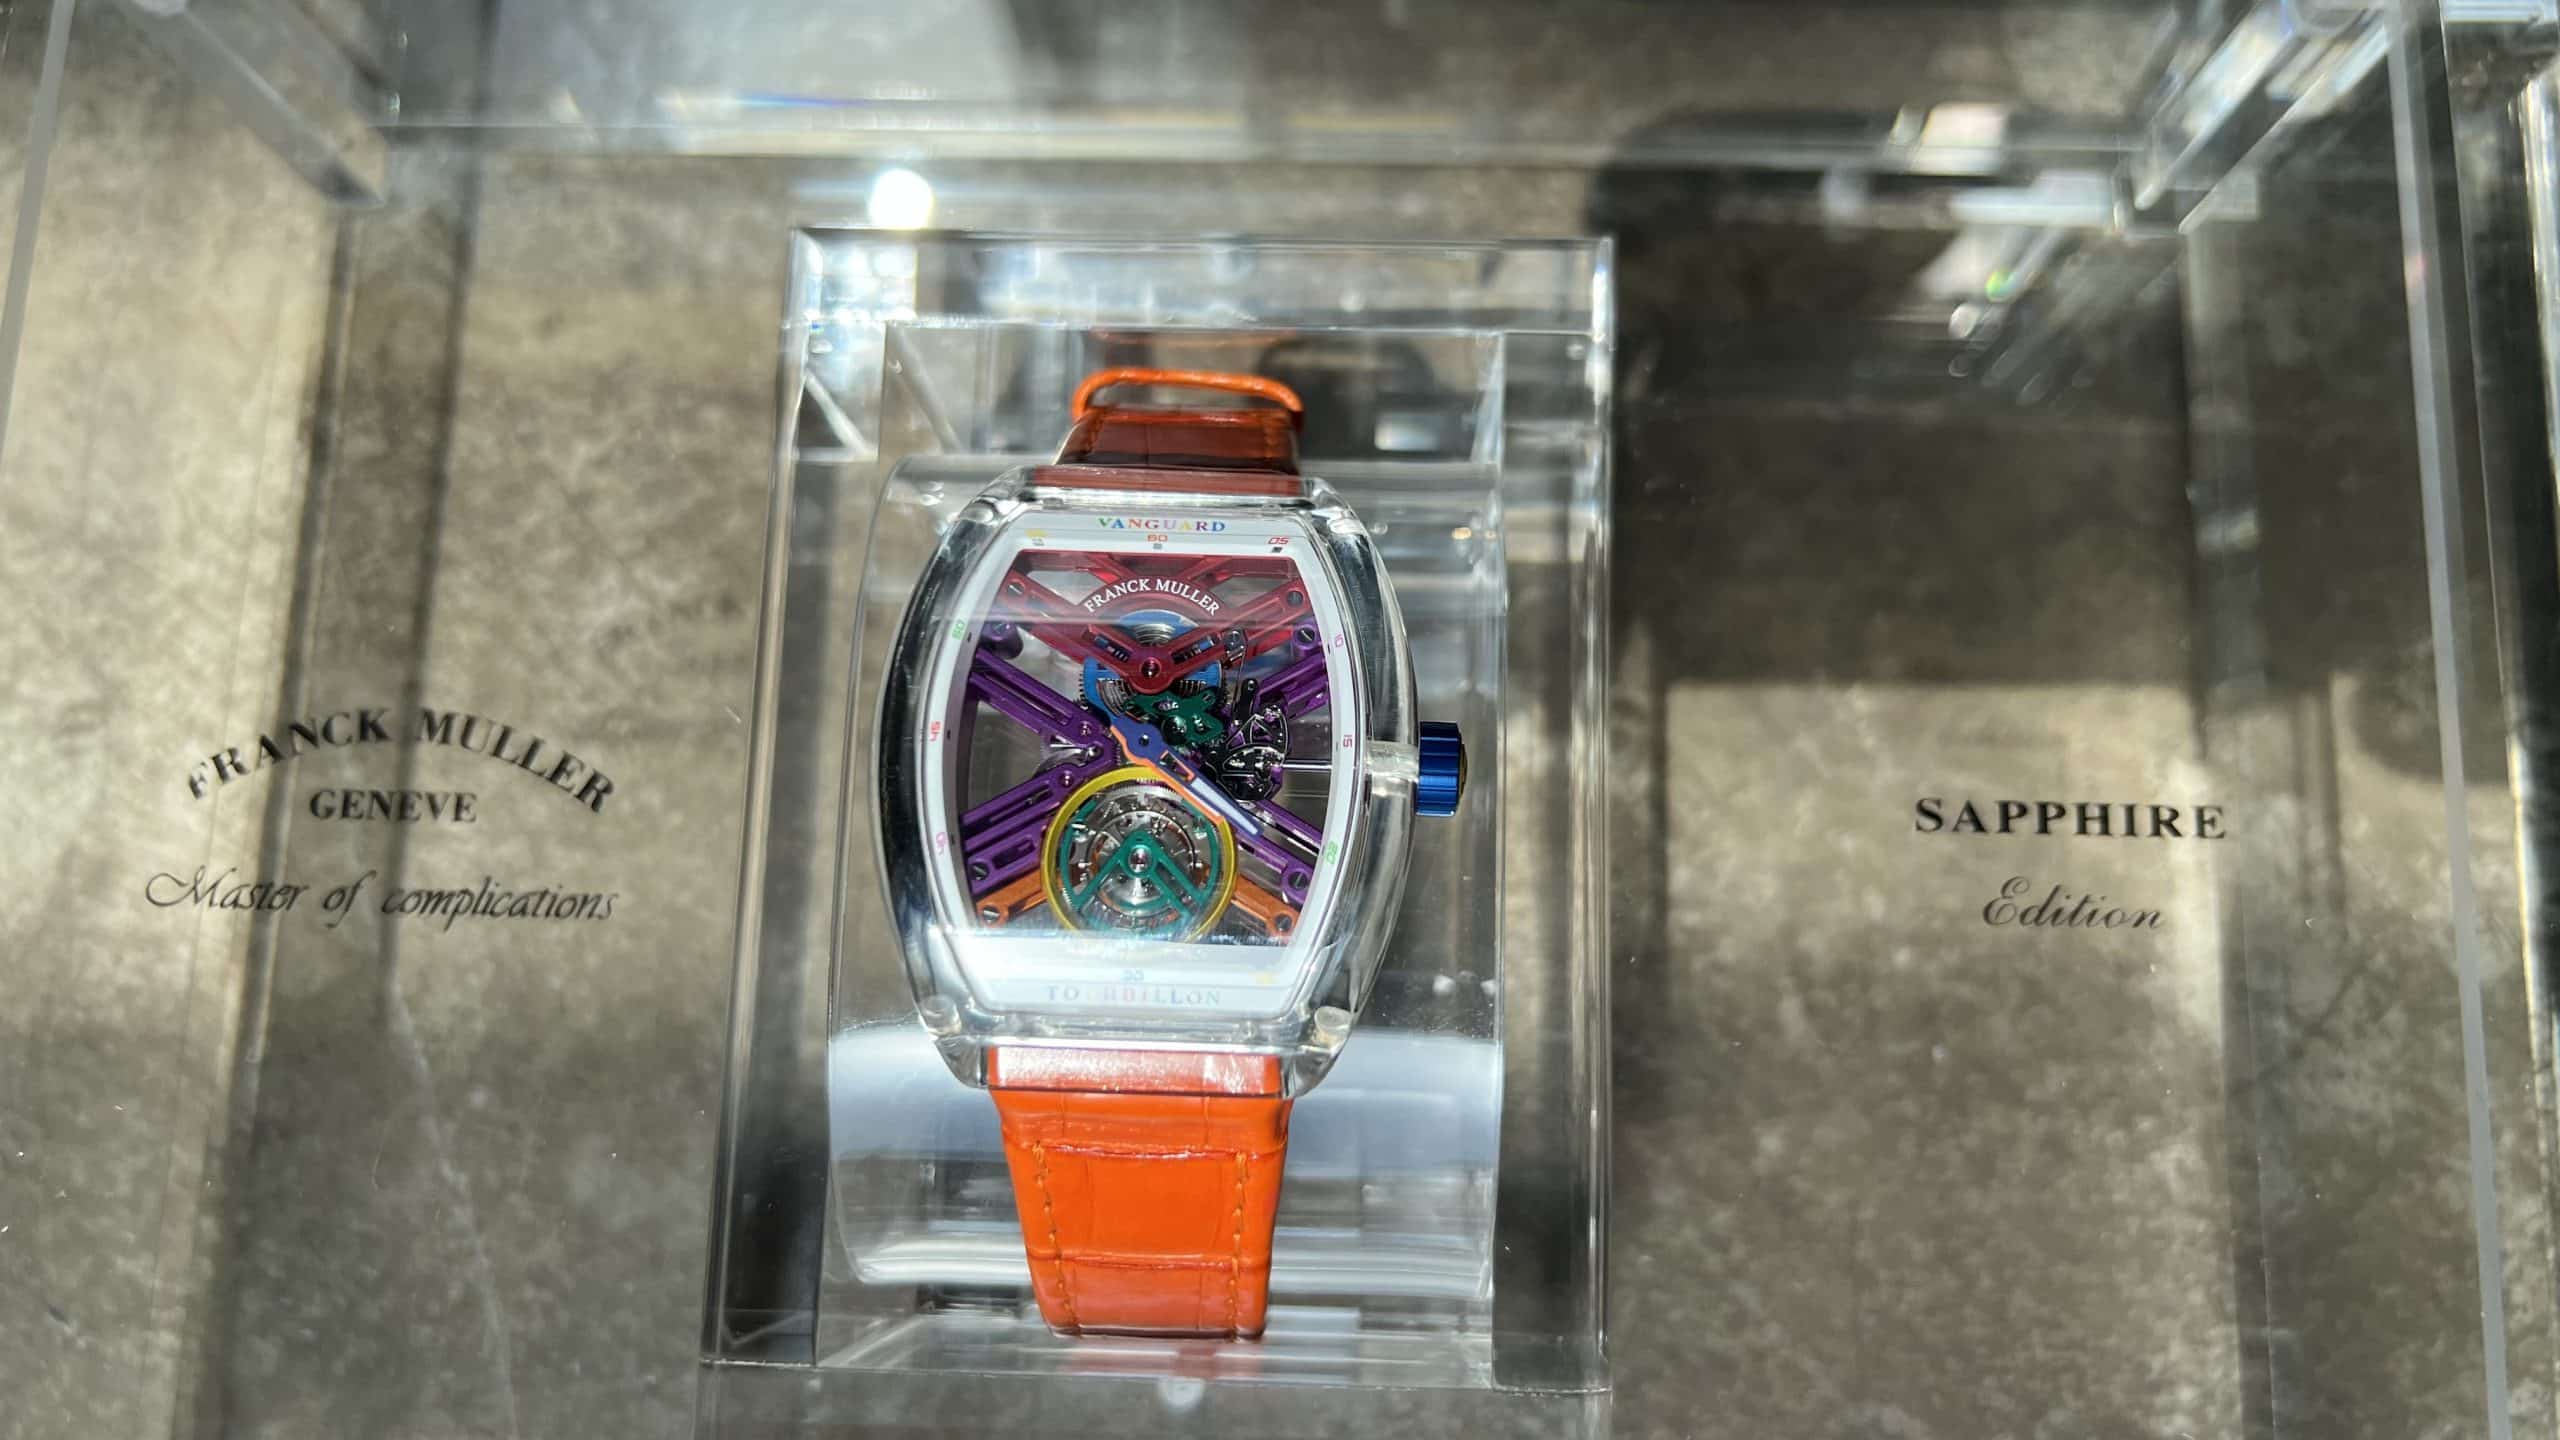 The watch in the sapphire crystal case.